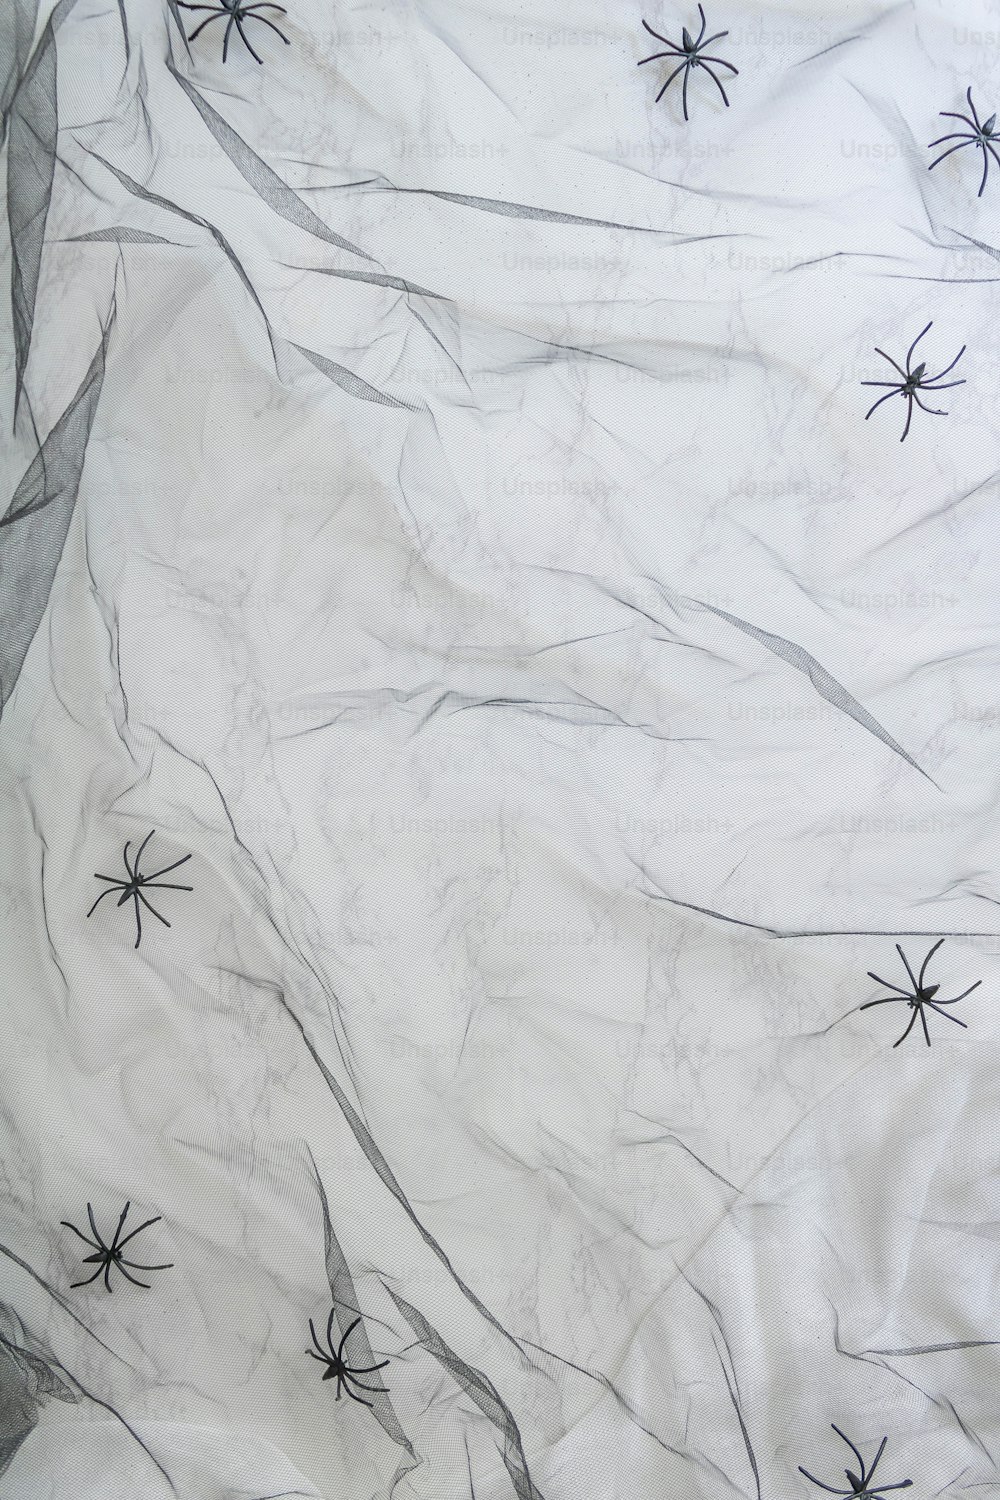 a white sheet with black spider webs on it